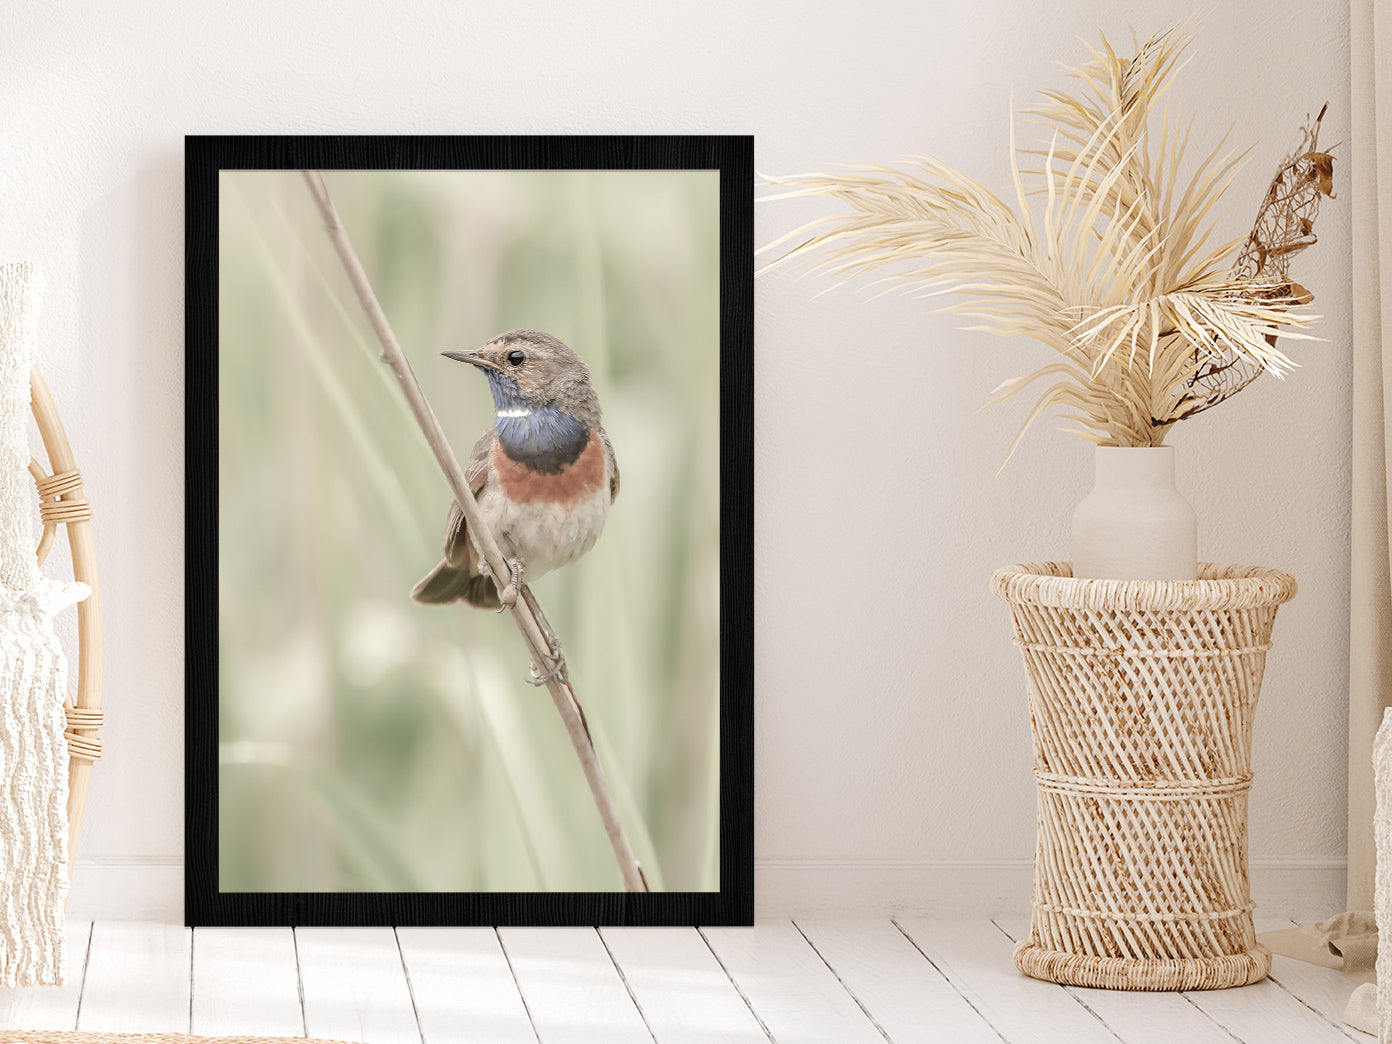 Bluethroat Bird on Branch Photograph Glass Framed Wall Art, Ready to Hang Quality Print Without White Border Black